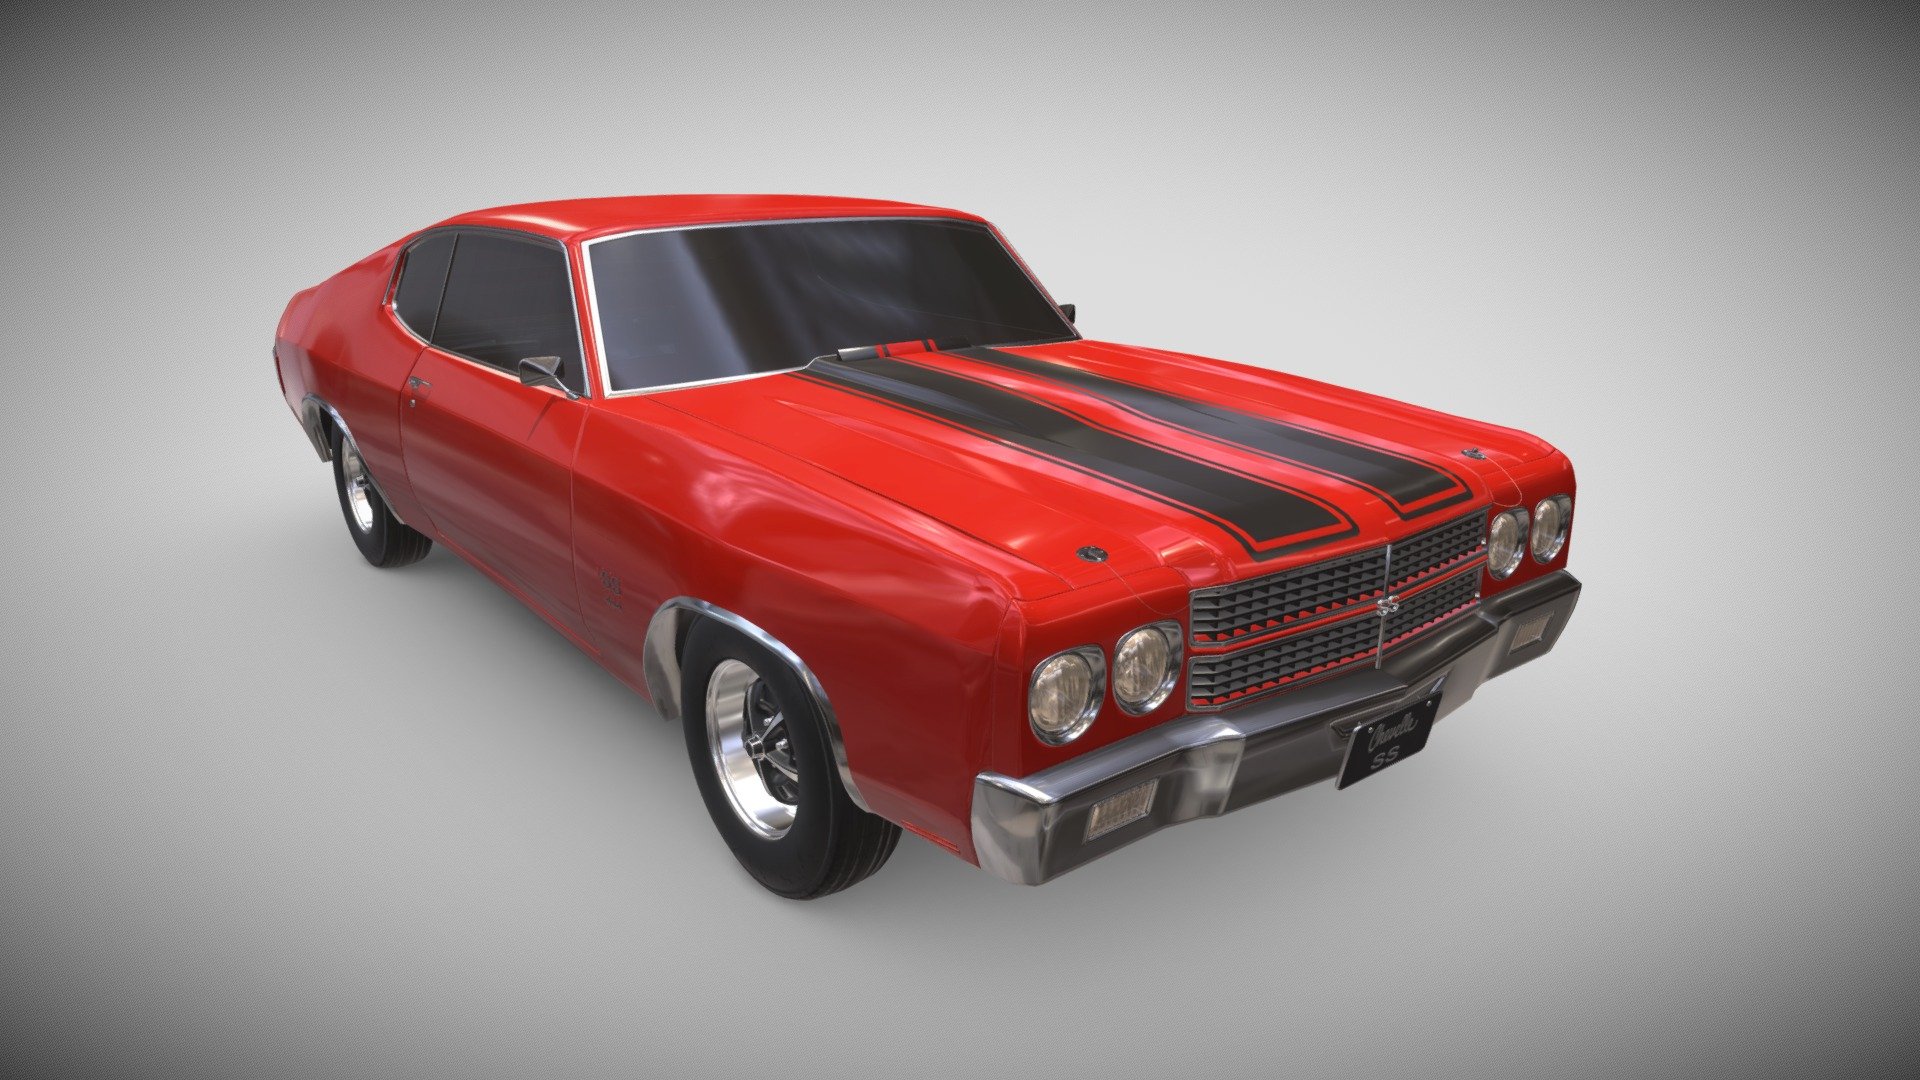 Chevrolet Chevelle SS_454_LS6 1970 Midpoly 3D Model

69,340 Polygons, 77,102 Vertices, 138,252 Triangles

•   Modeled in 3DsMax 2021

•   Mostly Quad Topology and editable

•   You can easily add Turbosmooth for more smoothness

•   Clean and Non-Overlapping UV, Unwrapped in RizomUV

•   Texturing done in Substance Painter for: Corona (4k), Unreal Engine (4k), and Pbr_Metallic_Roughness(4k)

•   Use the Smart Material for exporting ideal Texture Resolution

•   Rendered in Marmoset Toolbag

Files and Formats included:

3DsMAX 2021(Native),3DsMax 2018, FBX, OBJ, MTL, Smart Material, Texture Files

*Note 1: while using the Smart Material Do NOT forget to change the shader to Metal-Rough with Alpha-Blending and add Opacity Channel in the texture set setting tab.

*Would be appreciated if you consider the rating and support me with your point of view.

*Do not hesitate to ask your questions, I will respond as soon as possible

THANKS FOR YOUR TIME - Chevrolet Chevelle SS 454 1970 - 3D model by Arousha.Askarizad (@arousha.ask) 3d model